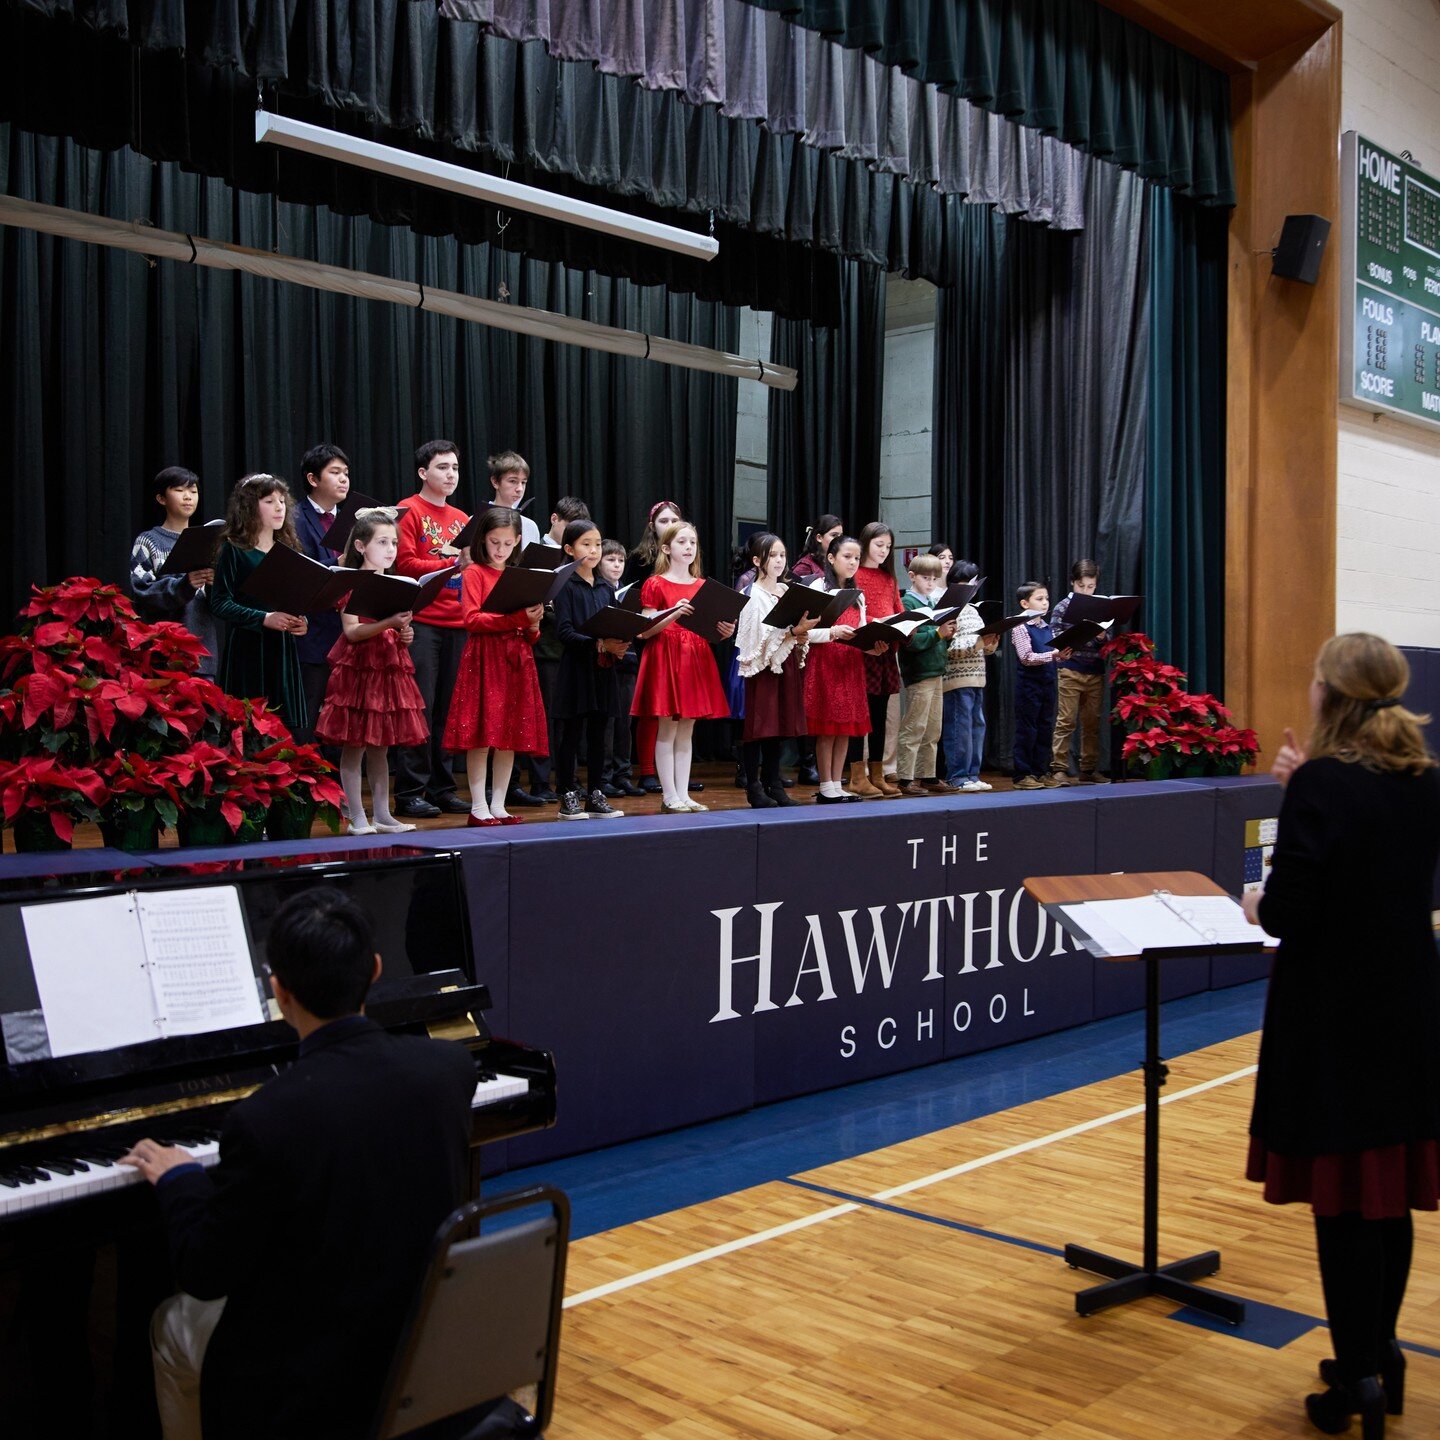 On Sunday, December 9th, families gathered in the school gym for a festive afternoon to celebrate the coming of the Christmas season. The event began with a Chorus Club performance of several well-beloved Christmas Carols, such as &quot;God Rest Ye M